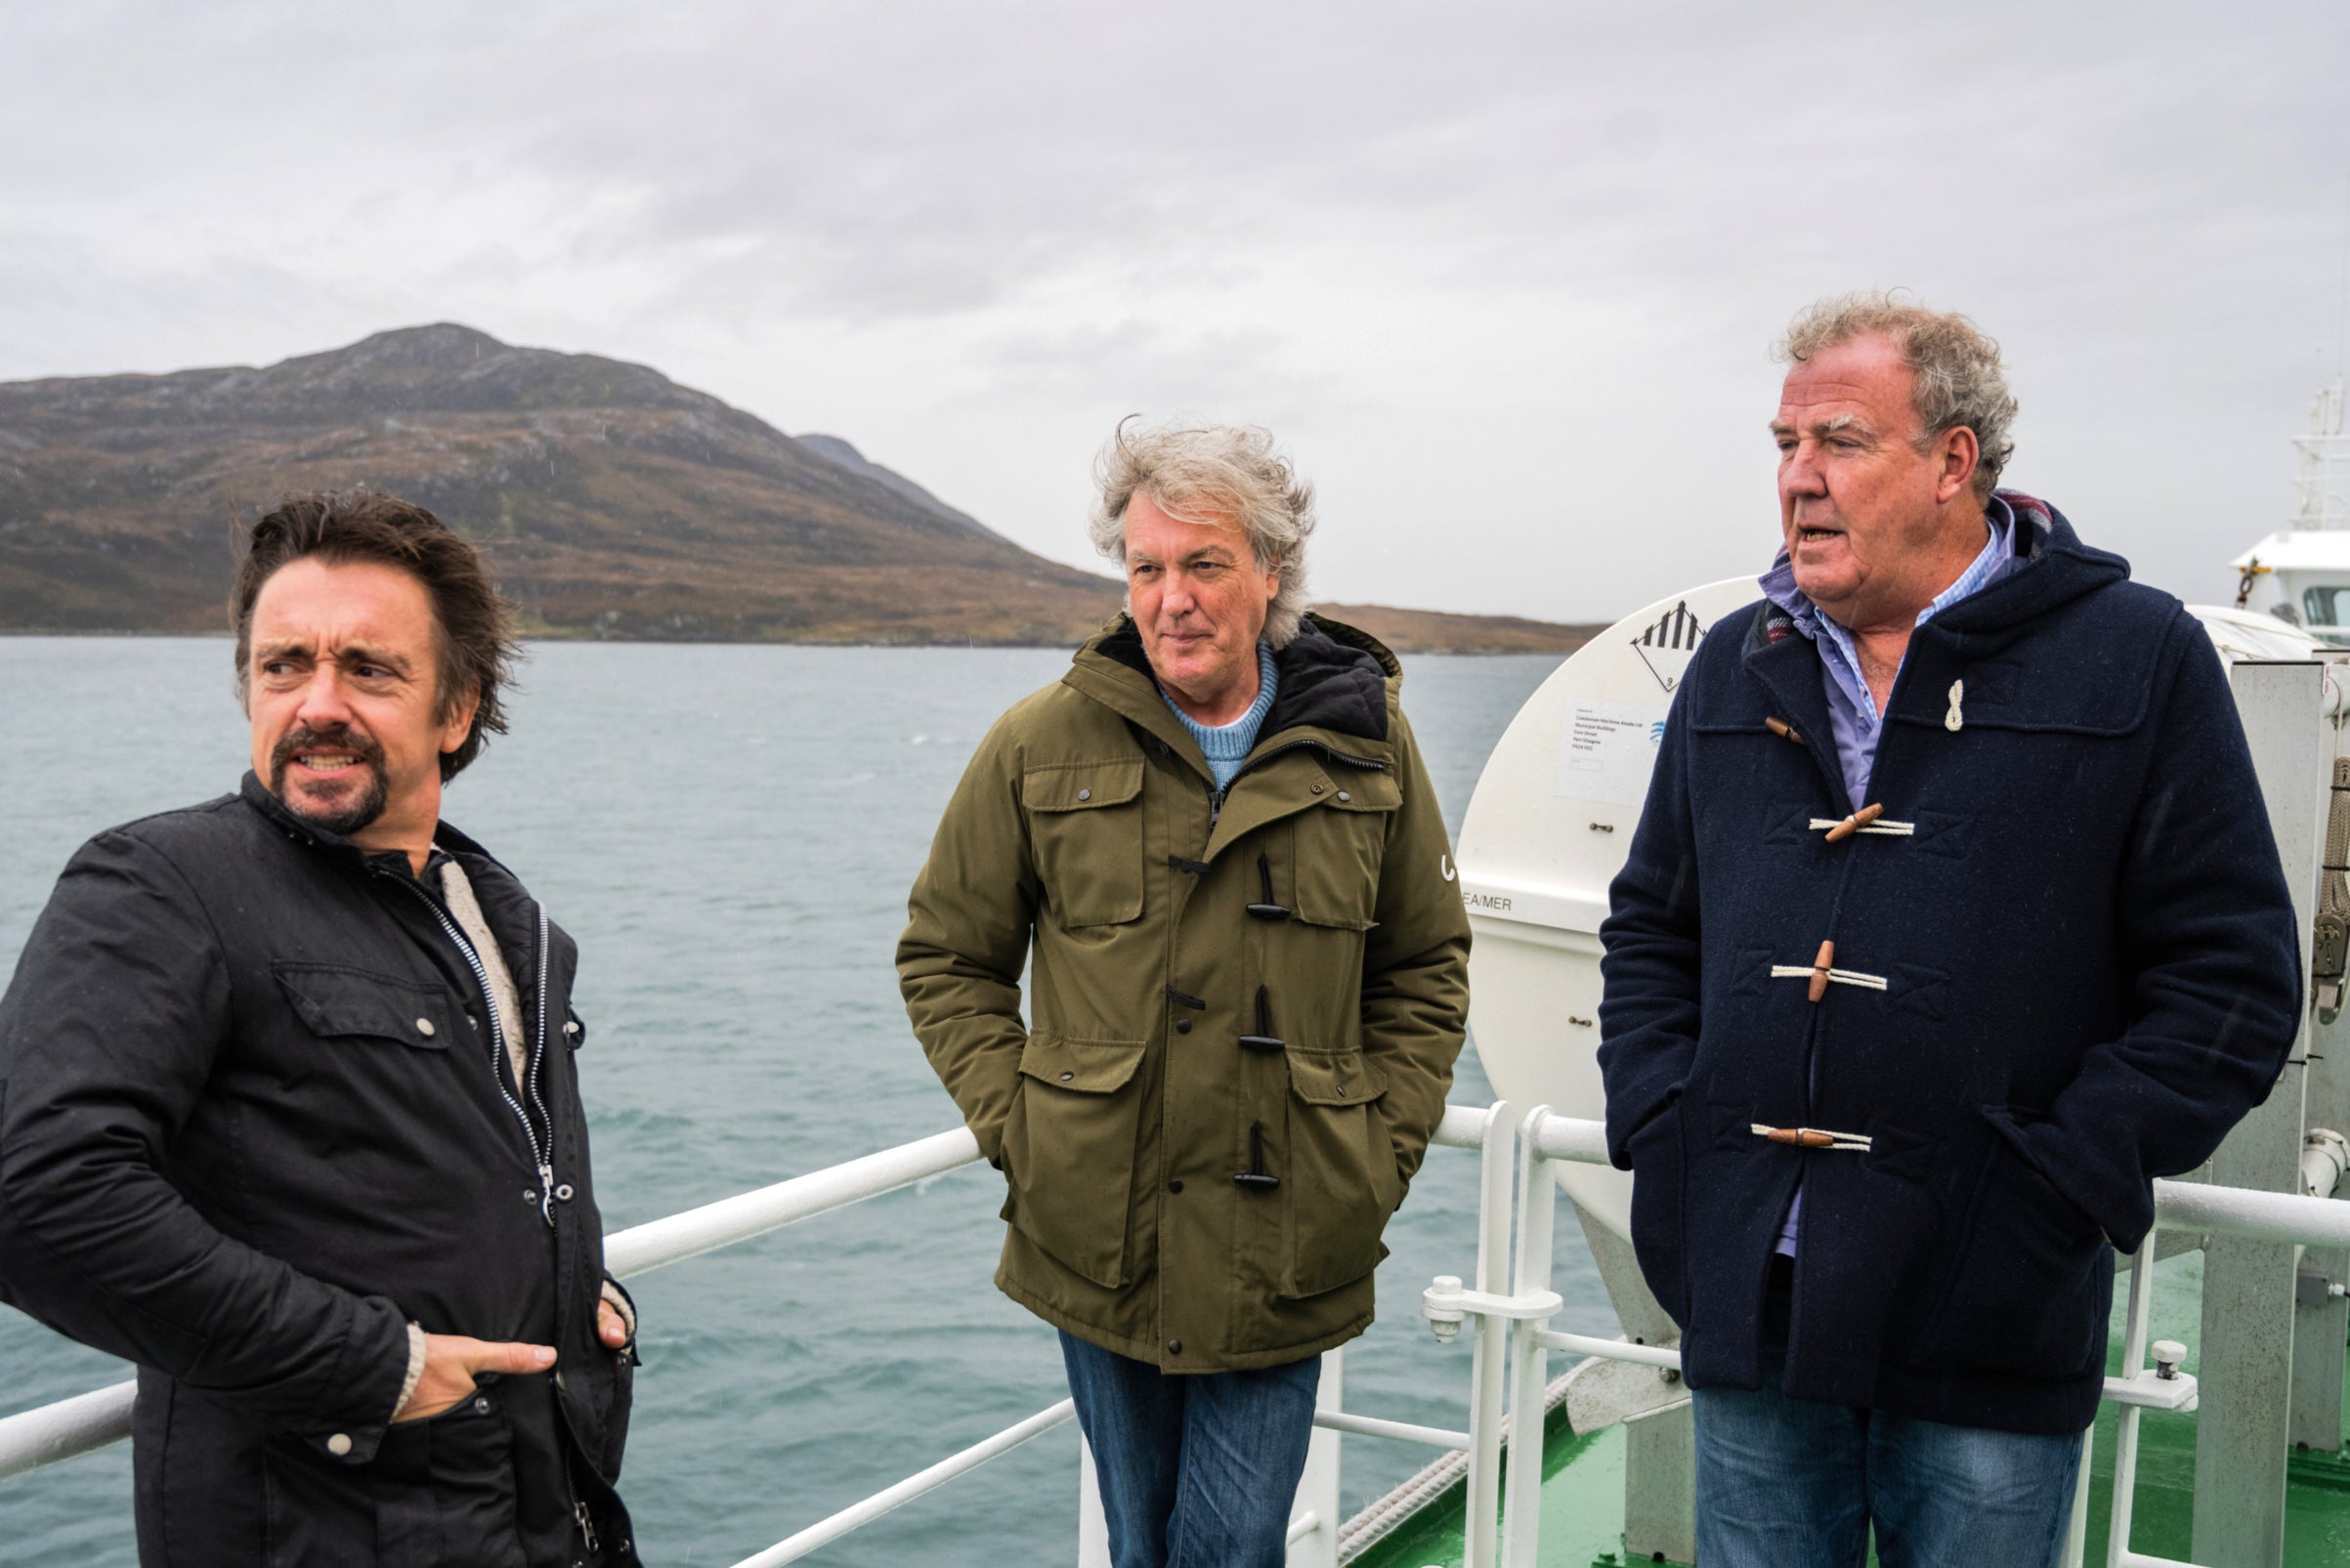 Jeremy Clarkson responds to James May saying trio's chemistry is 'fuelled  by mutual loathing